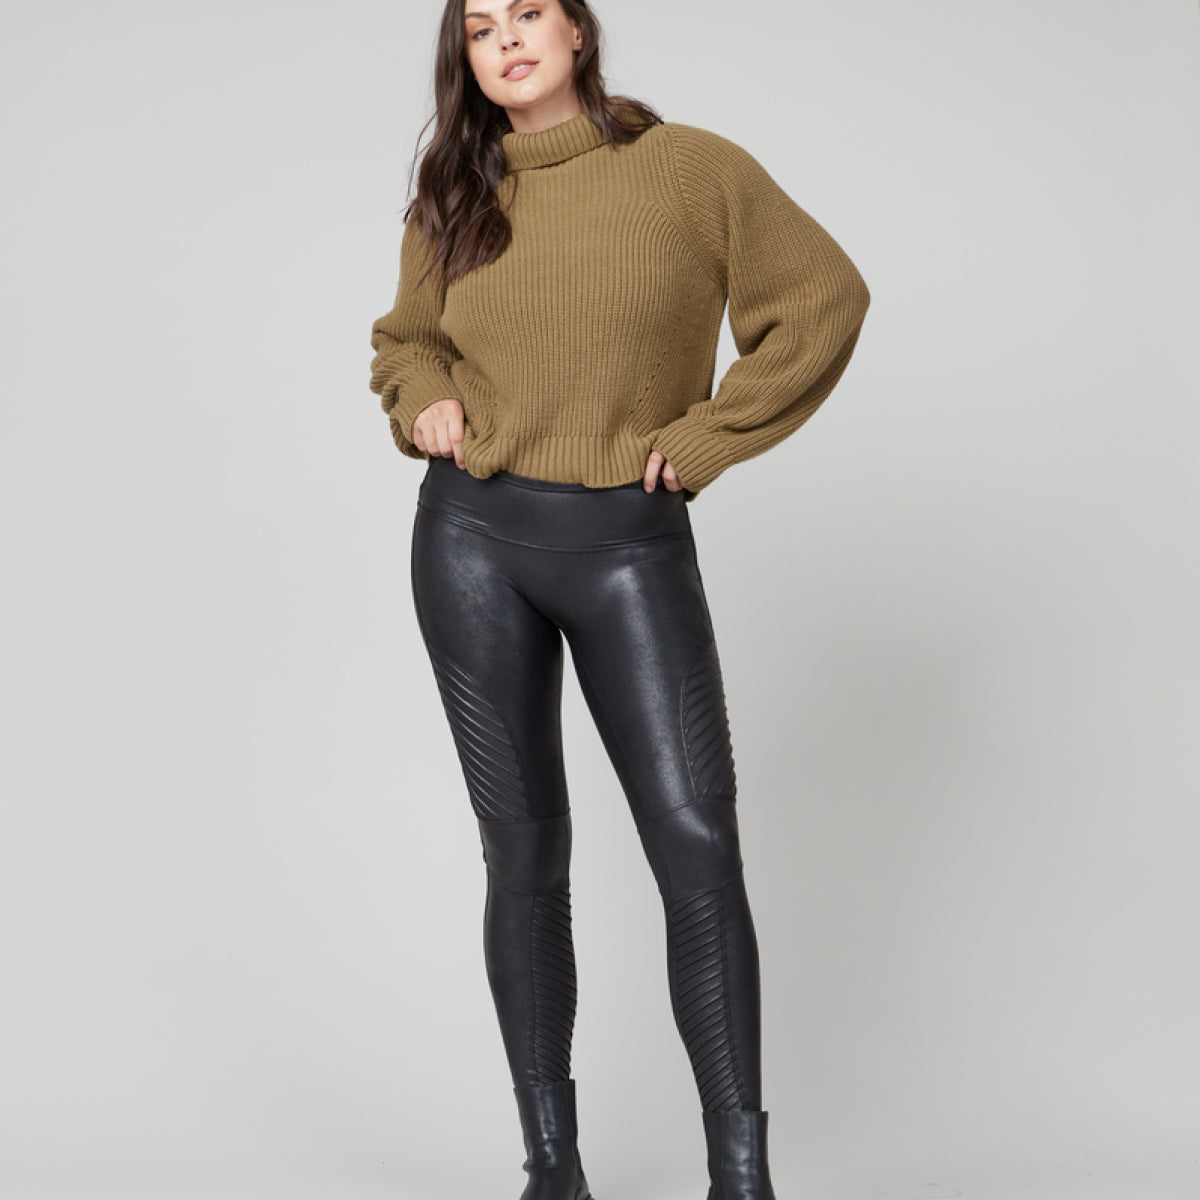 SPANX - Don't faux-get, our Faux Leather Leggings come in 7+ styles (like  these Faux Moto ones!) for a faux leather look every day of the week.  #Regram: Carmen Renee #Spanx #SpanxStyle